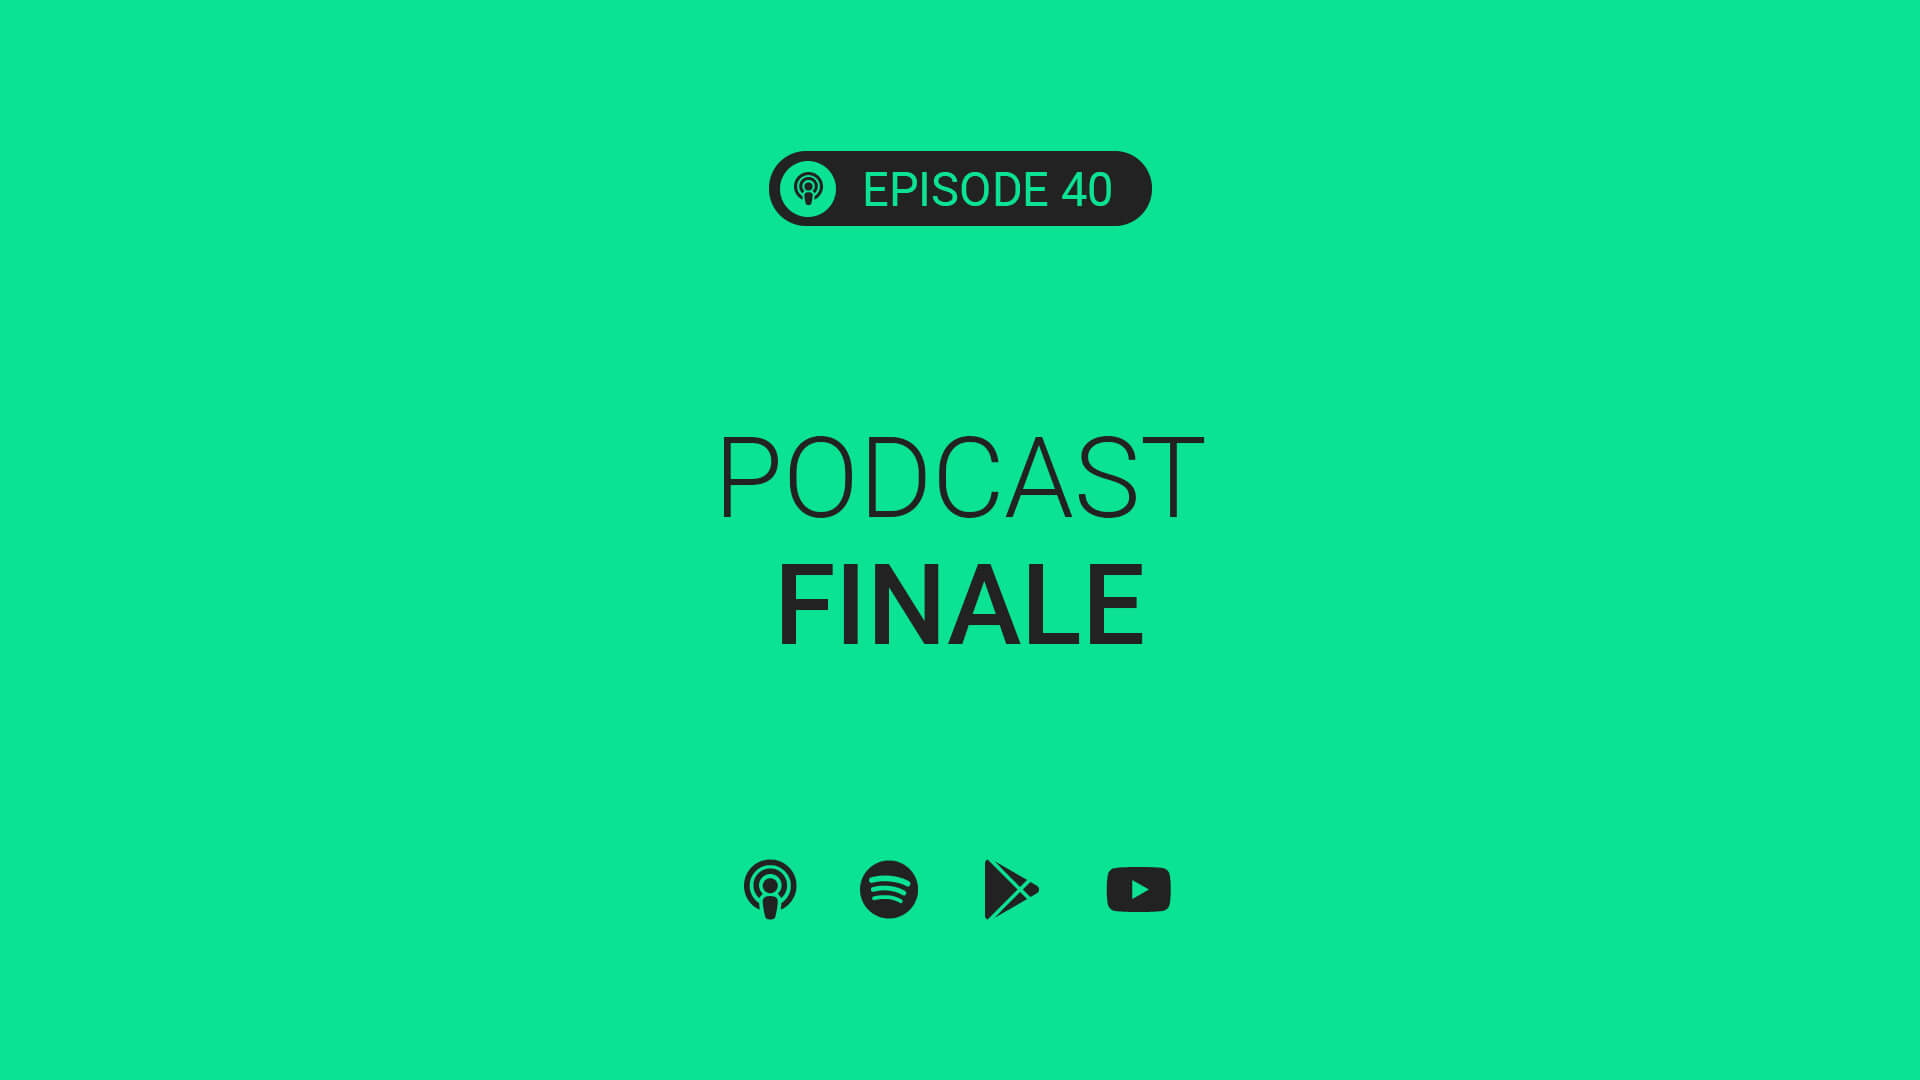 Ep 40: Podcast Finale ft. Kade and Dillon Young